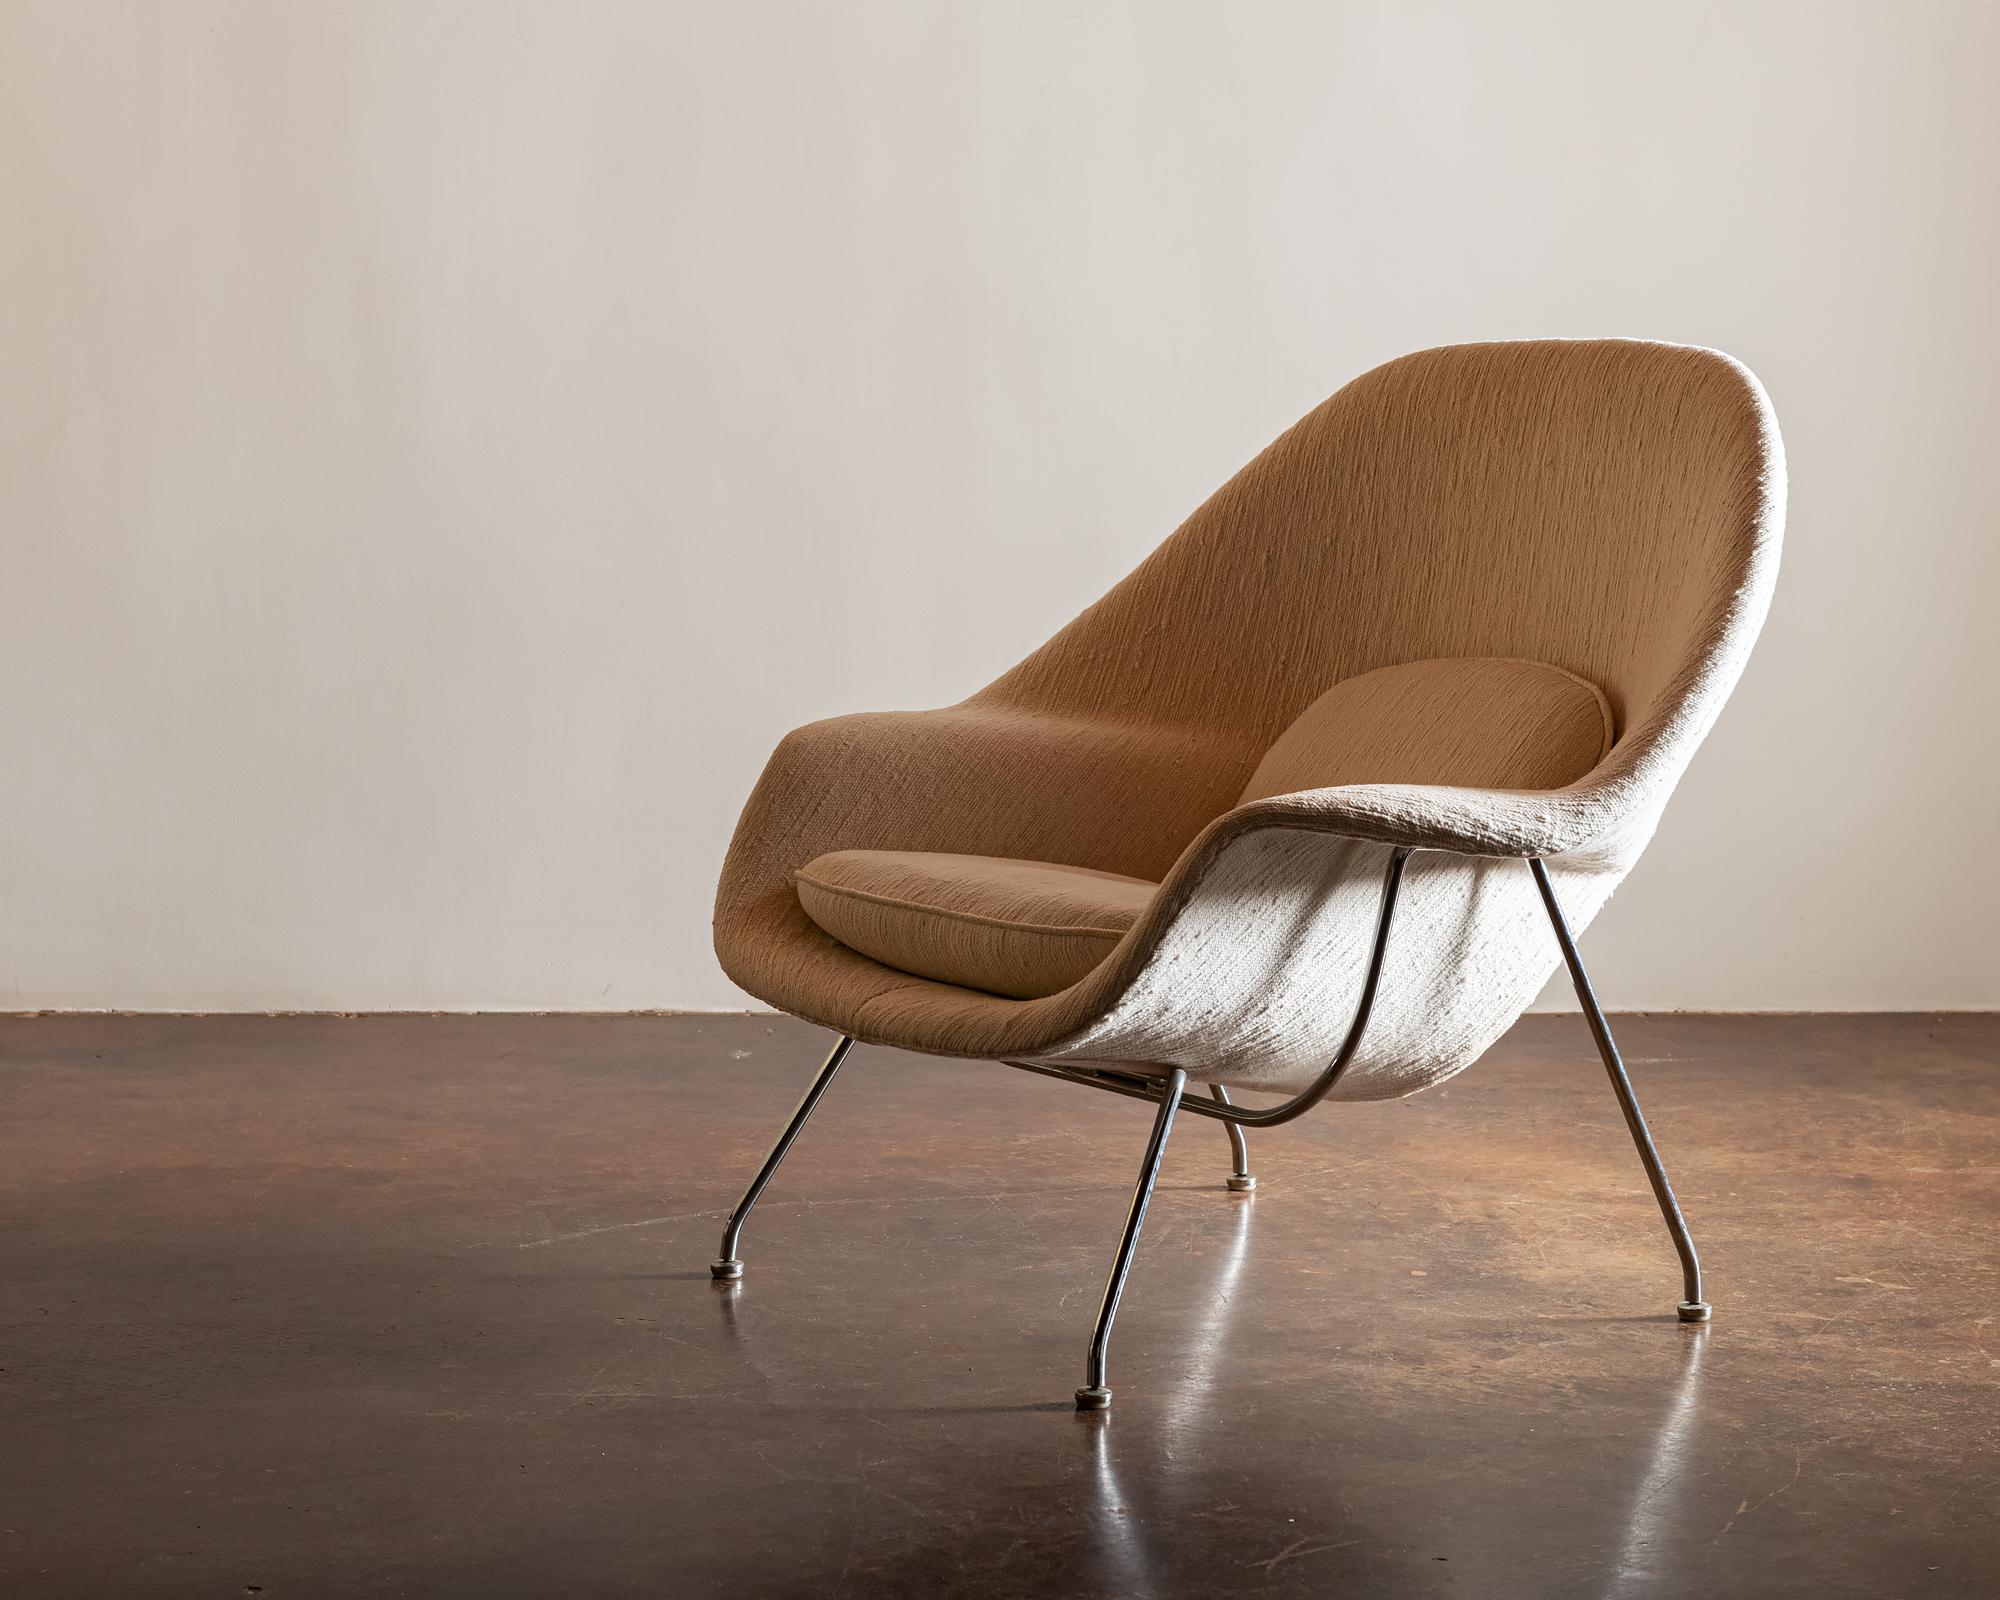 Mid-20th Century Iconic Womb Chair and Ottoman by Eero Saarinen for Knoll, United States, 1960s